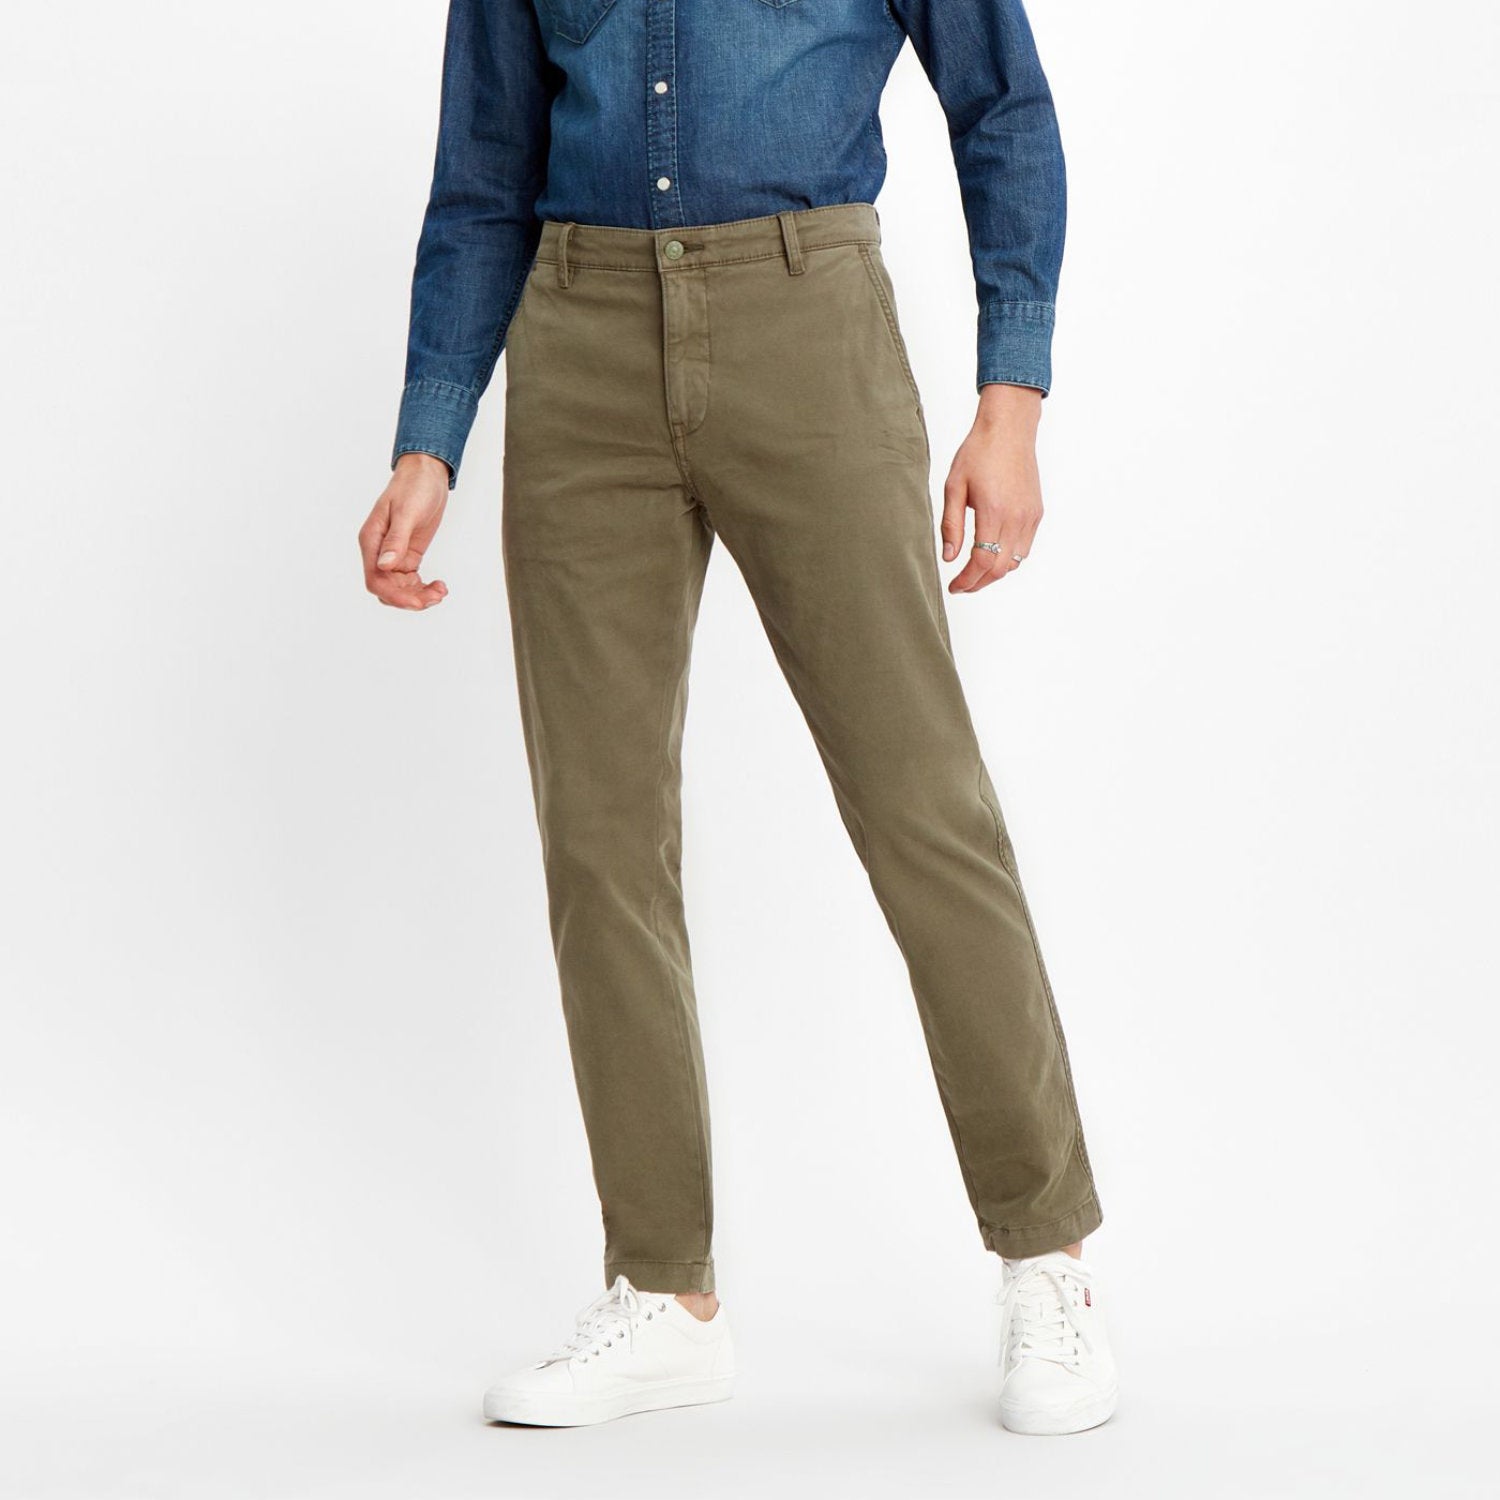 Levis Xx Standard Taper Chino Pants - Shady - 1 - Bottoms - Casual Pants